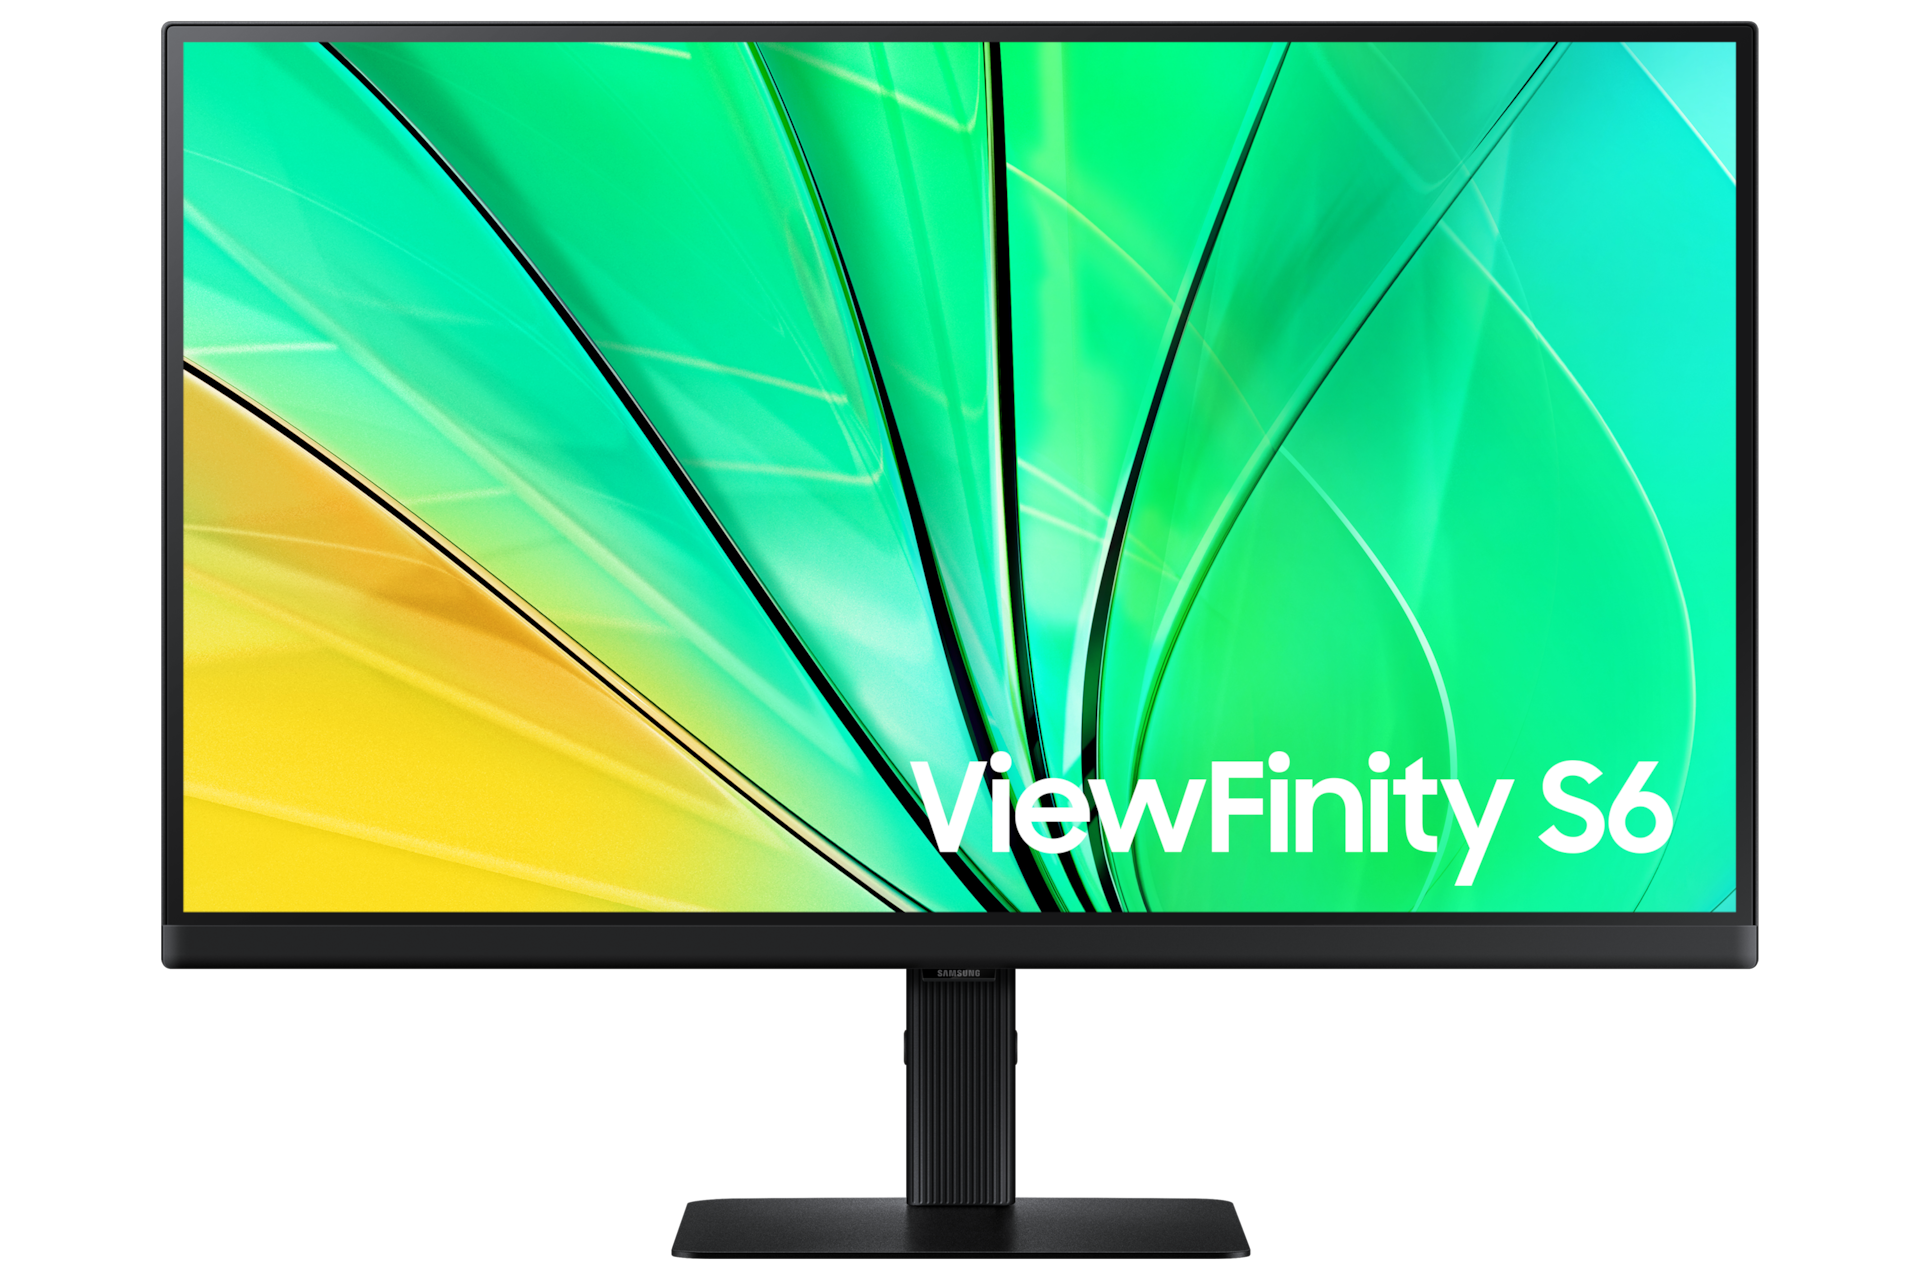 Front of 27inch Samsung ViewFinity S60D with green wave on screen.